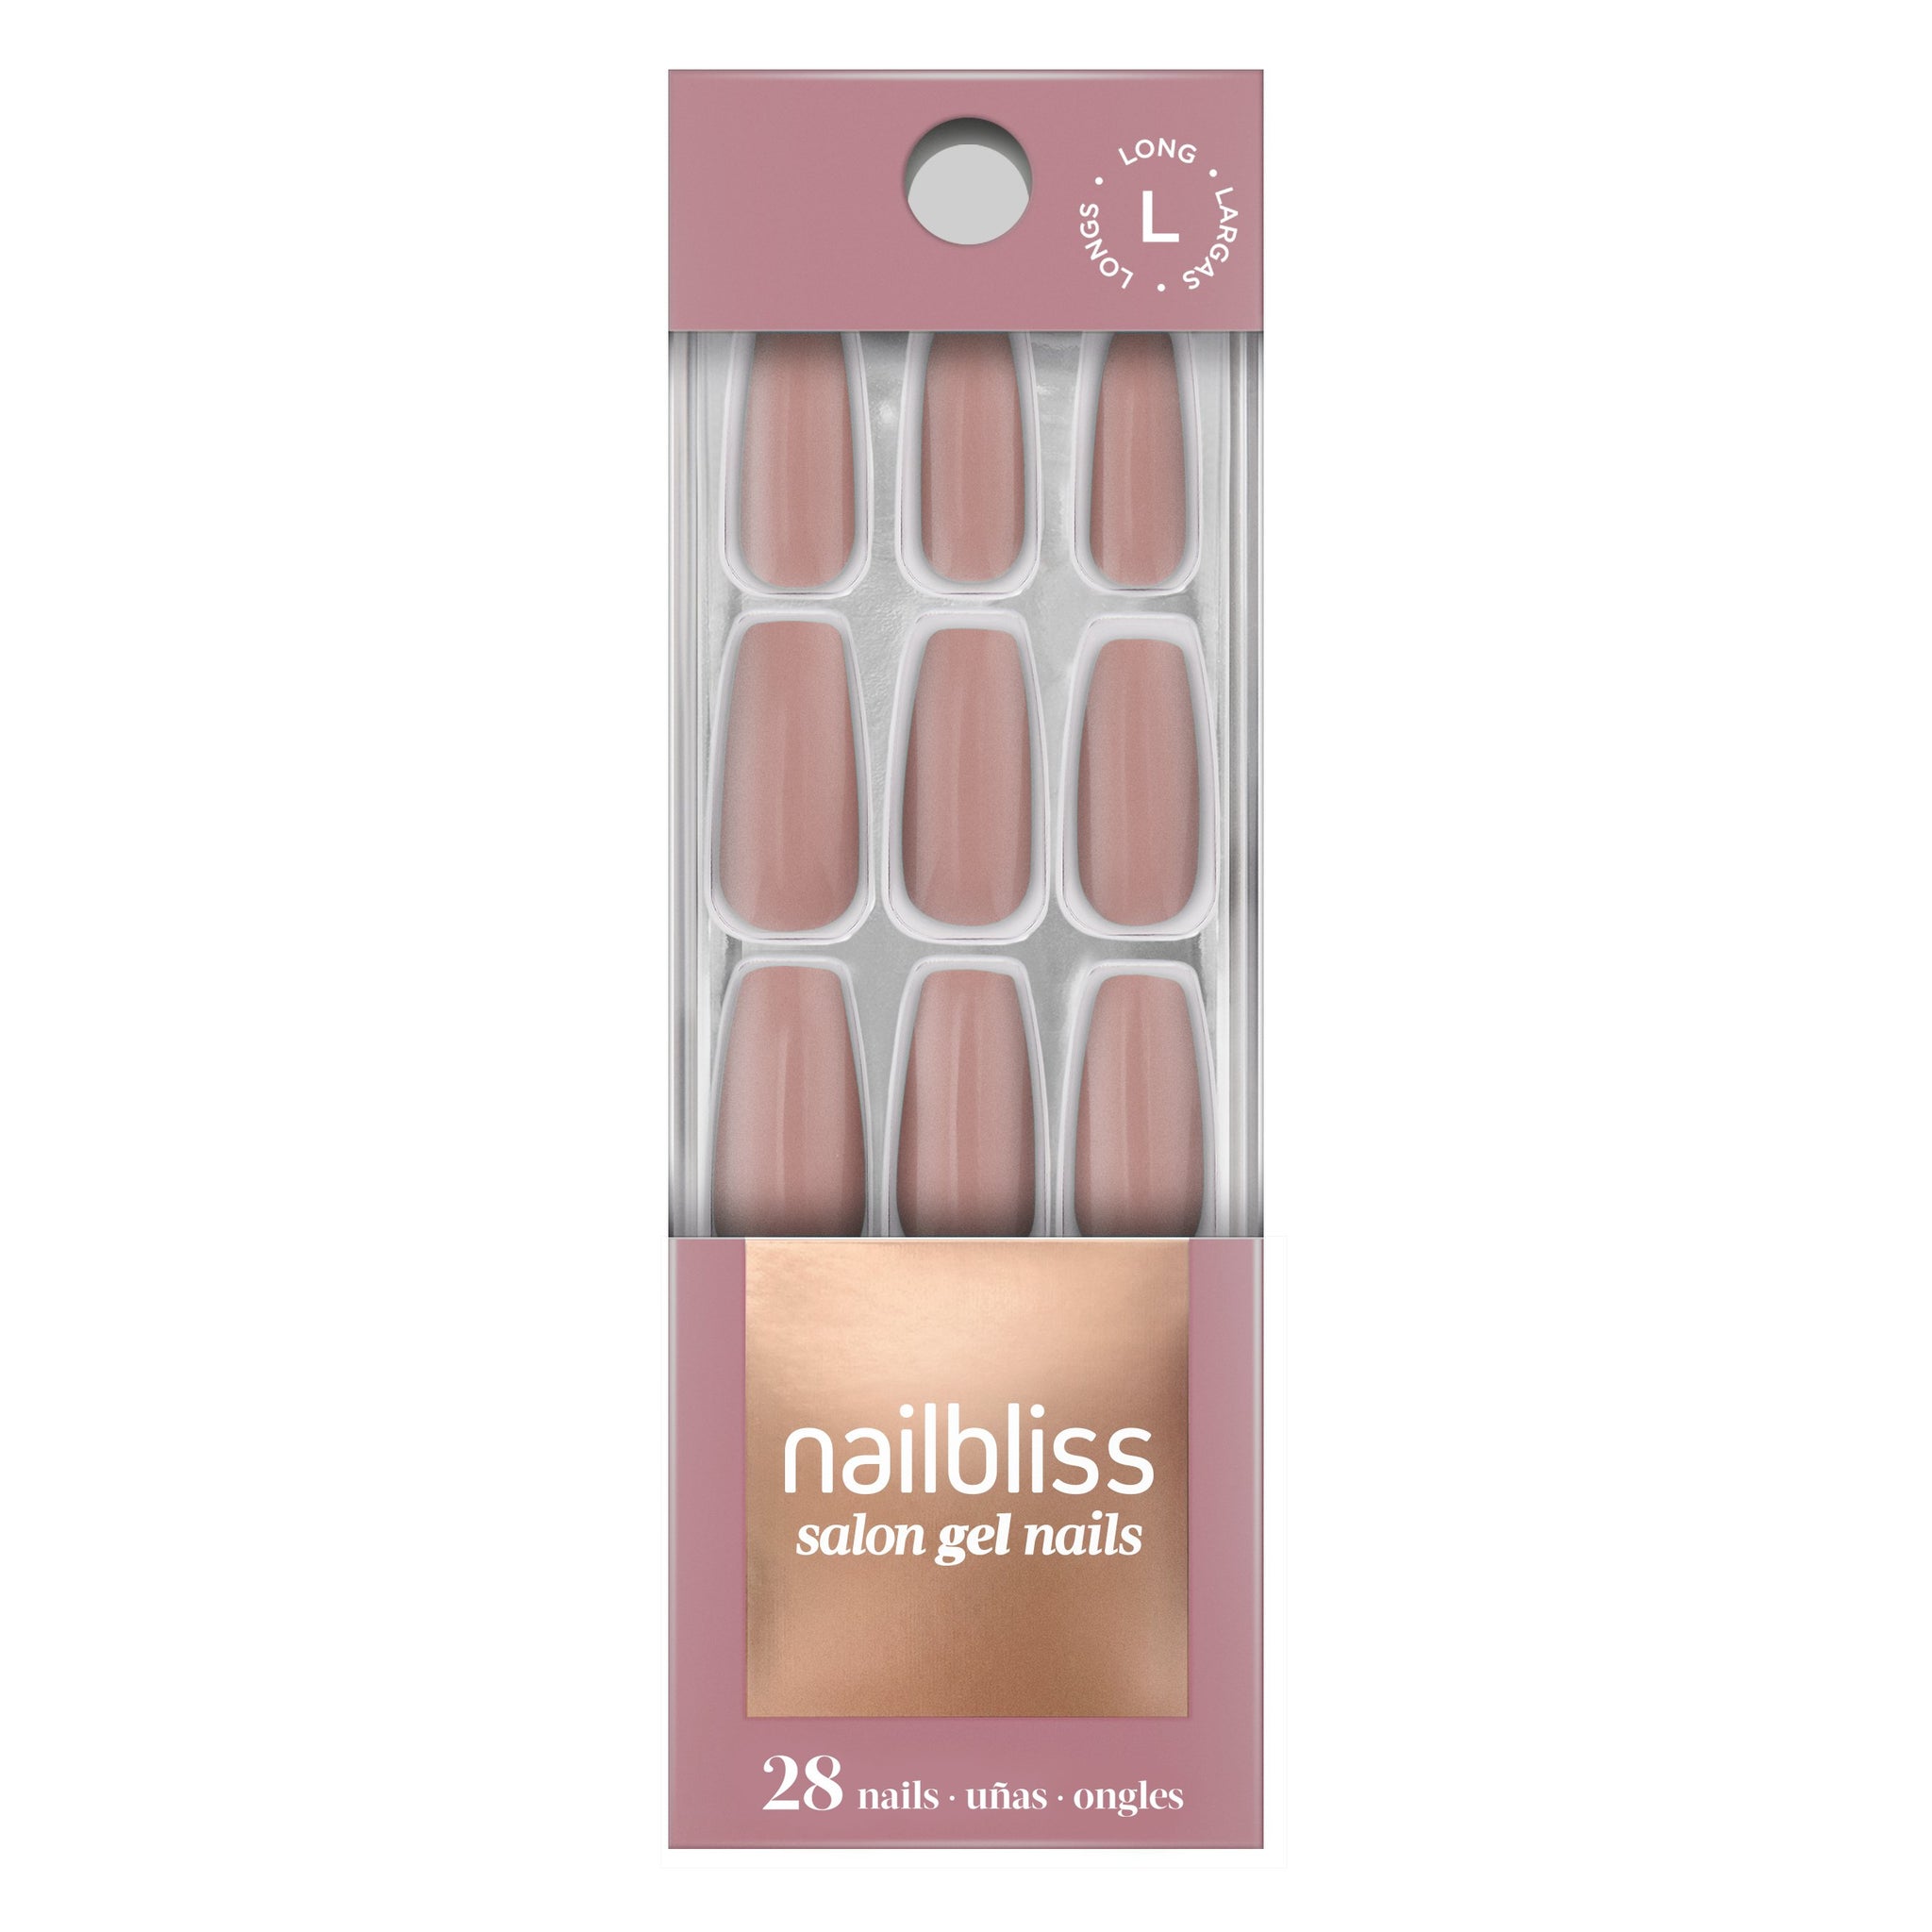 Makeup Nails Glue On Gel Nails CLASSIC NUDE